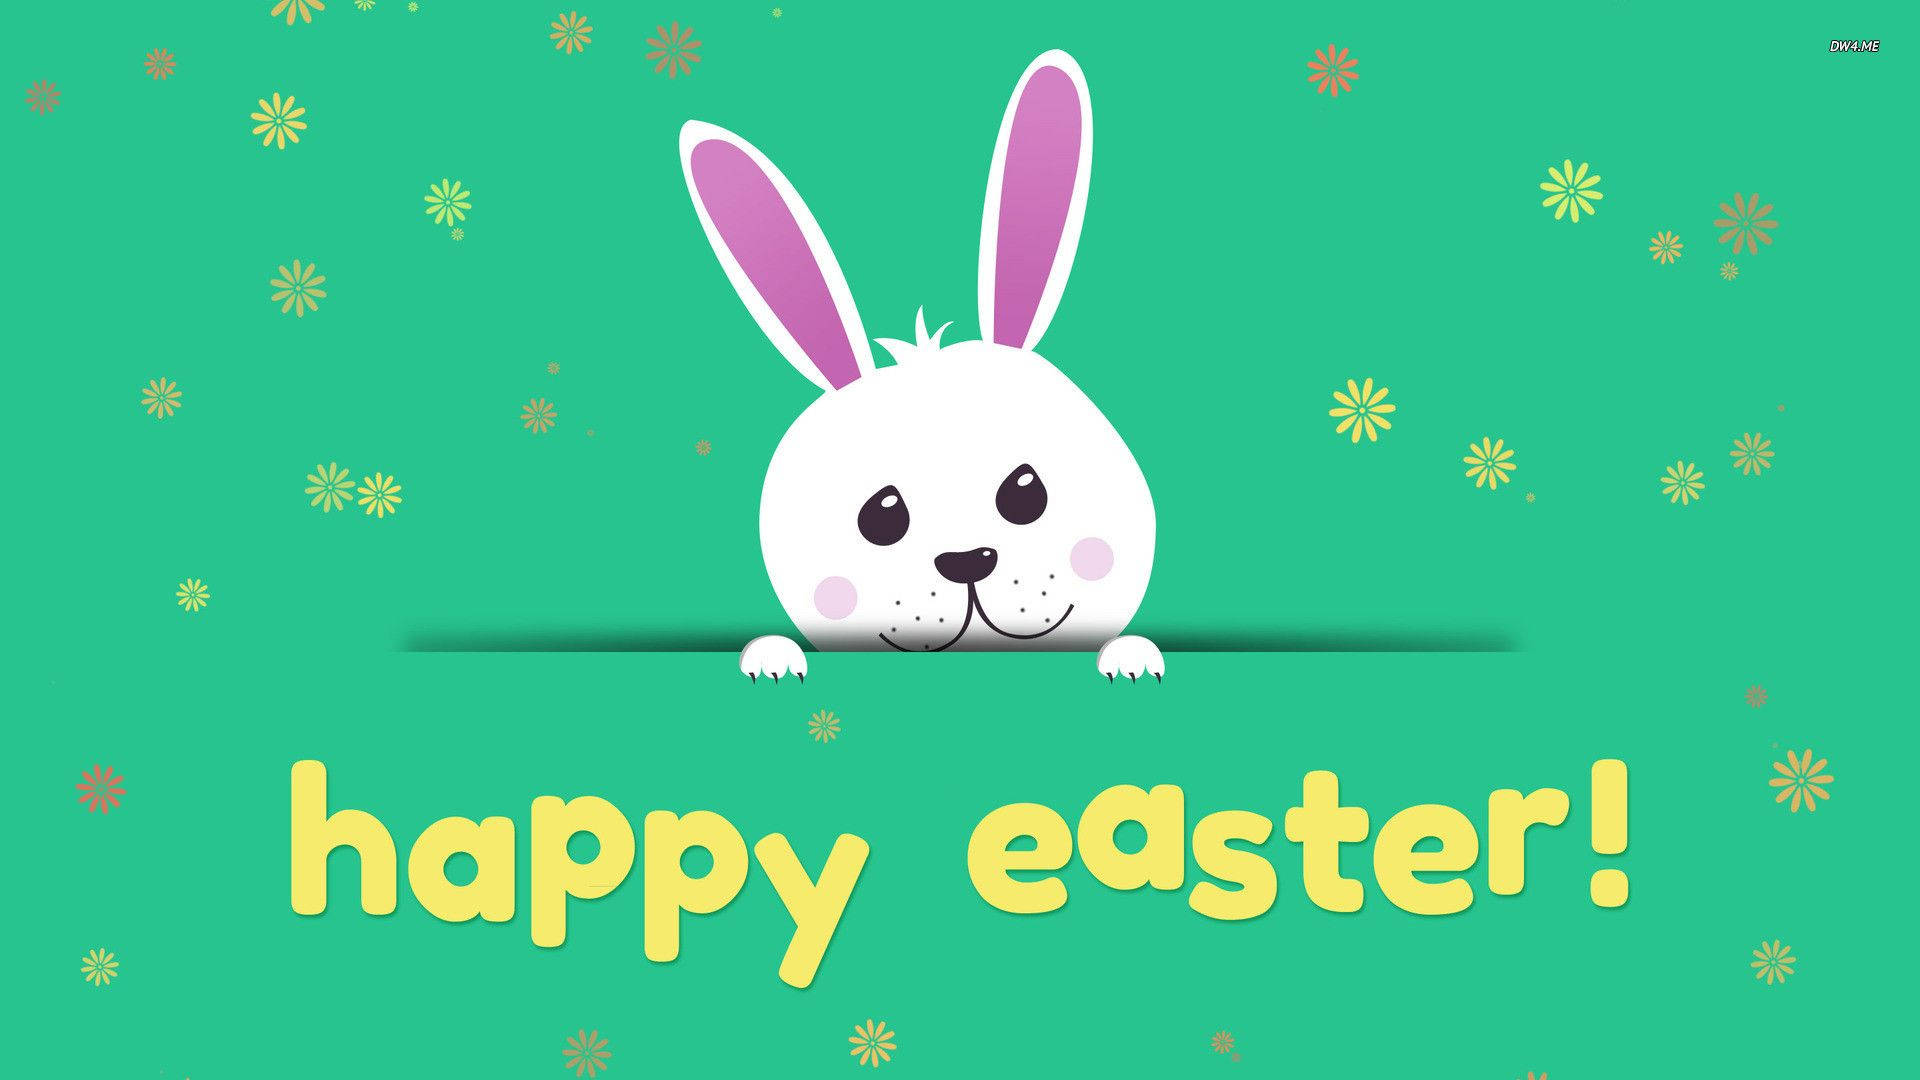 Free Cute Easter Wallpaper Downloads, Cute Easter Wallpaper for FREE